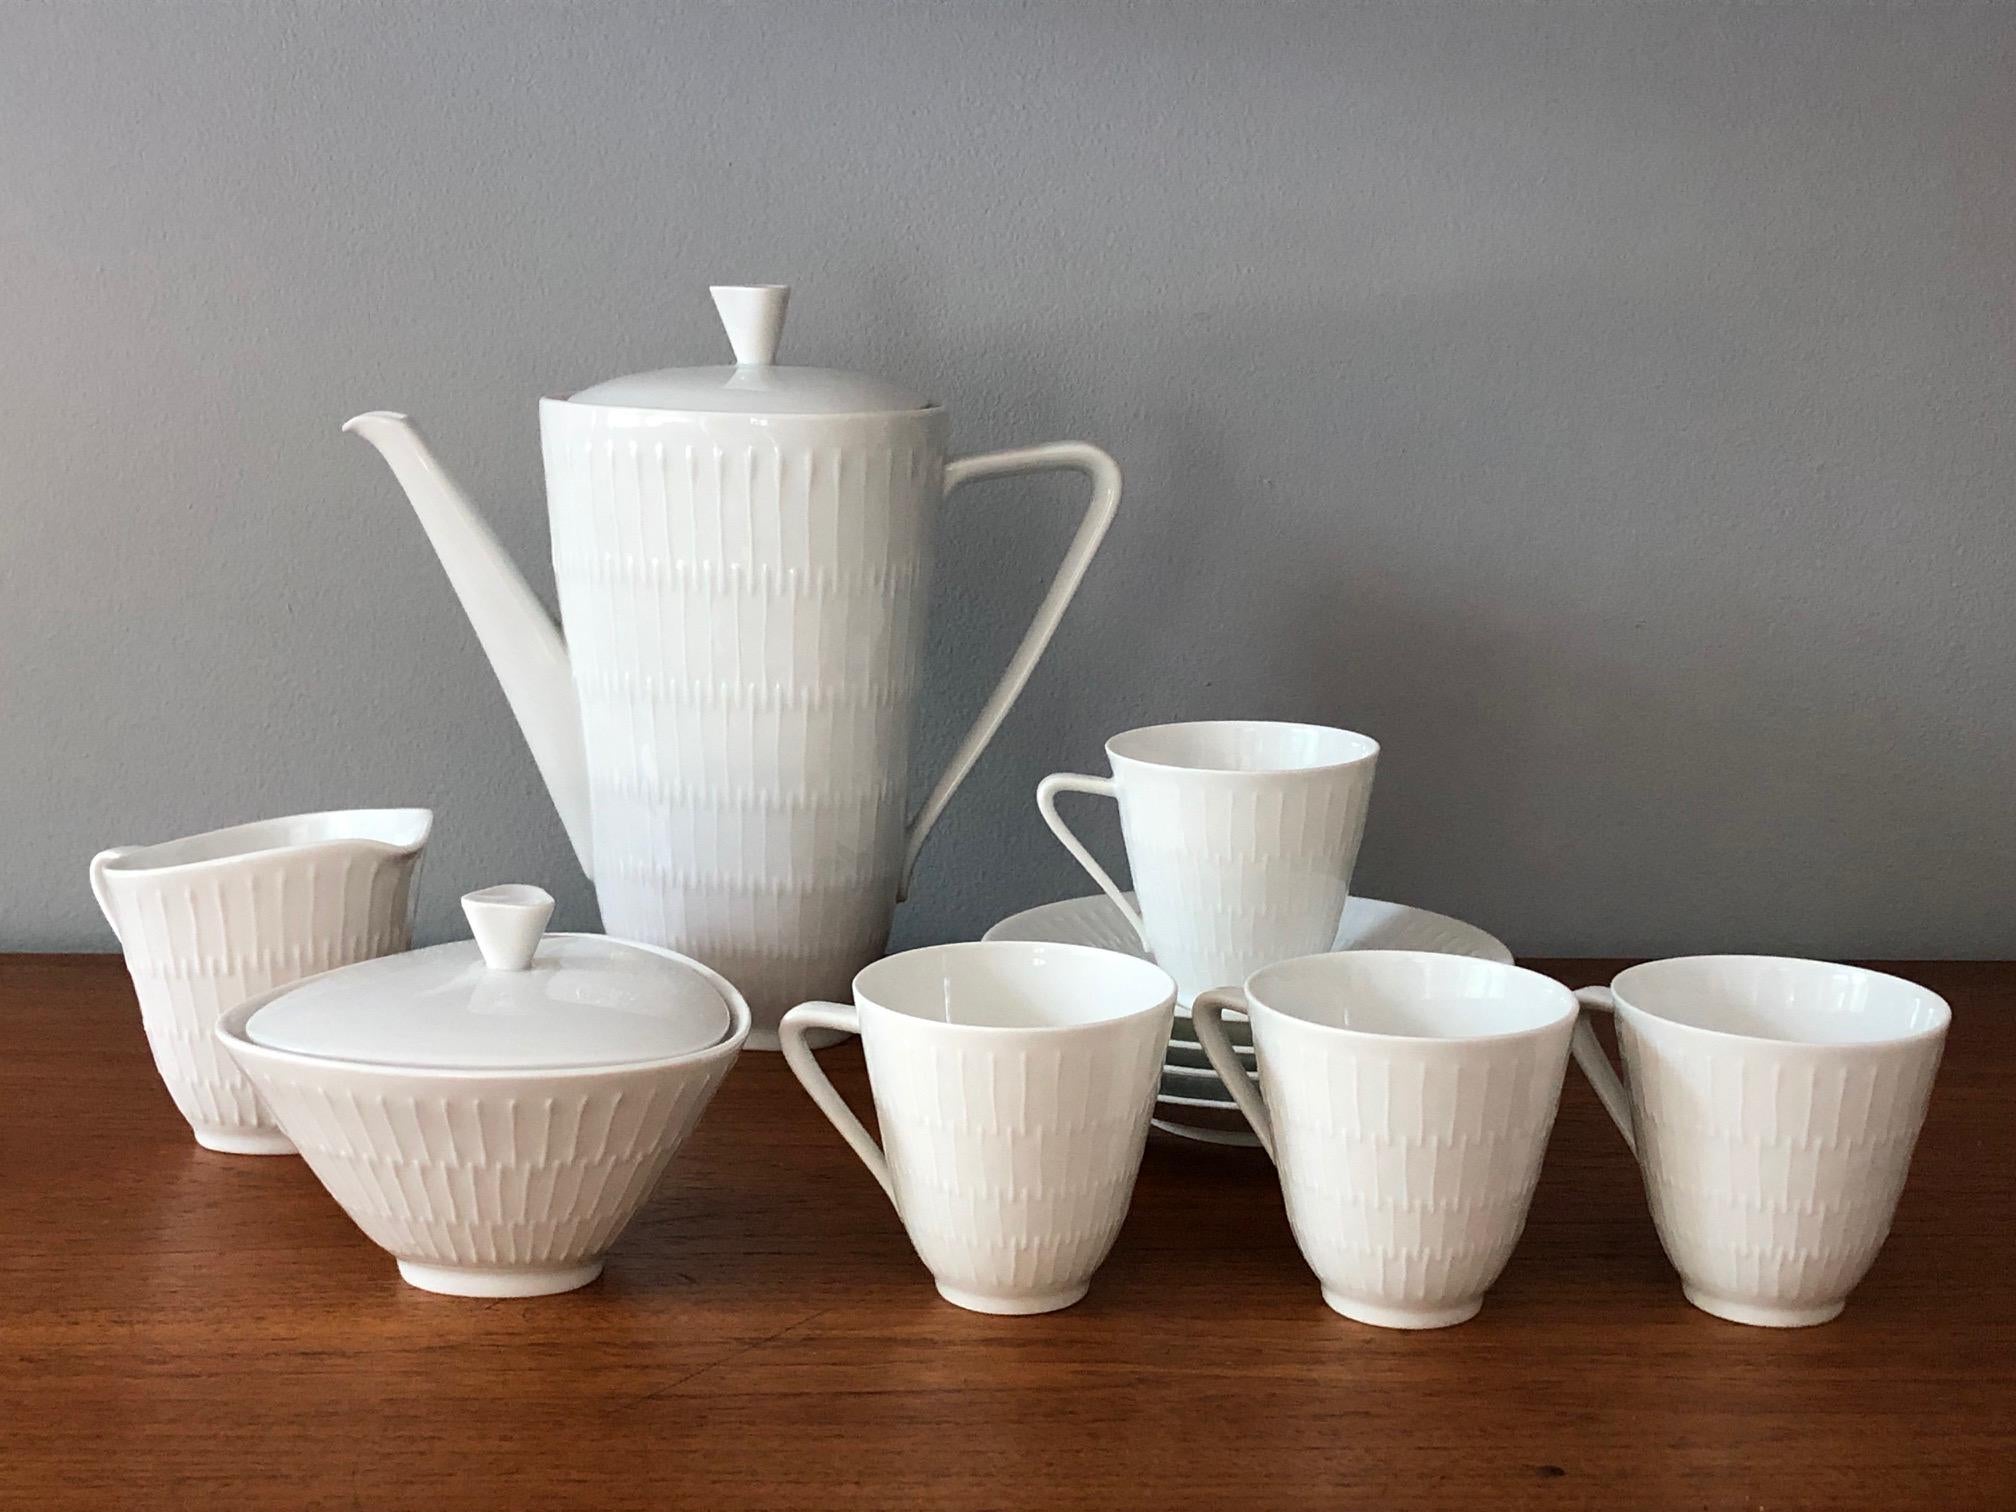 Elegant 1950s white porcelain 'Apart' coffee/tea set from Hutschenreuther Selb, Germany. The set includes 4 cups, 4 saucers, a coffee pot, a creamer/milk jug, a  sugar bowl, a dessert plate,e and a small serving dish with saucer (14-piece set).